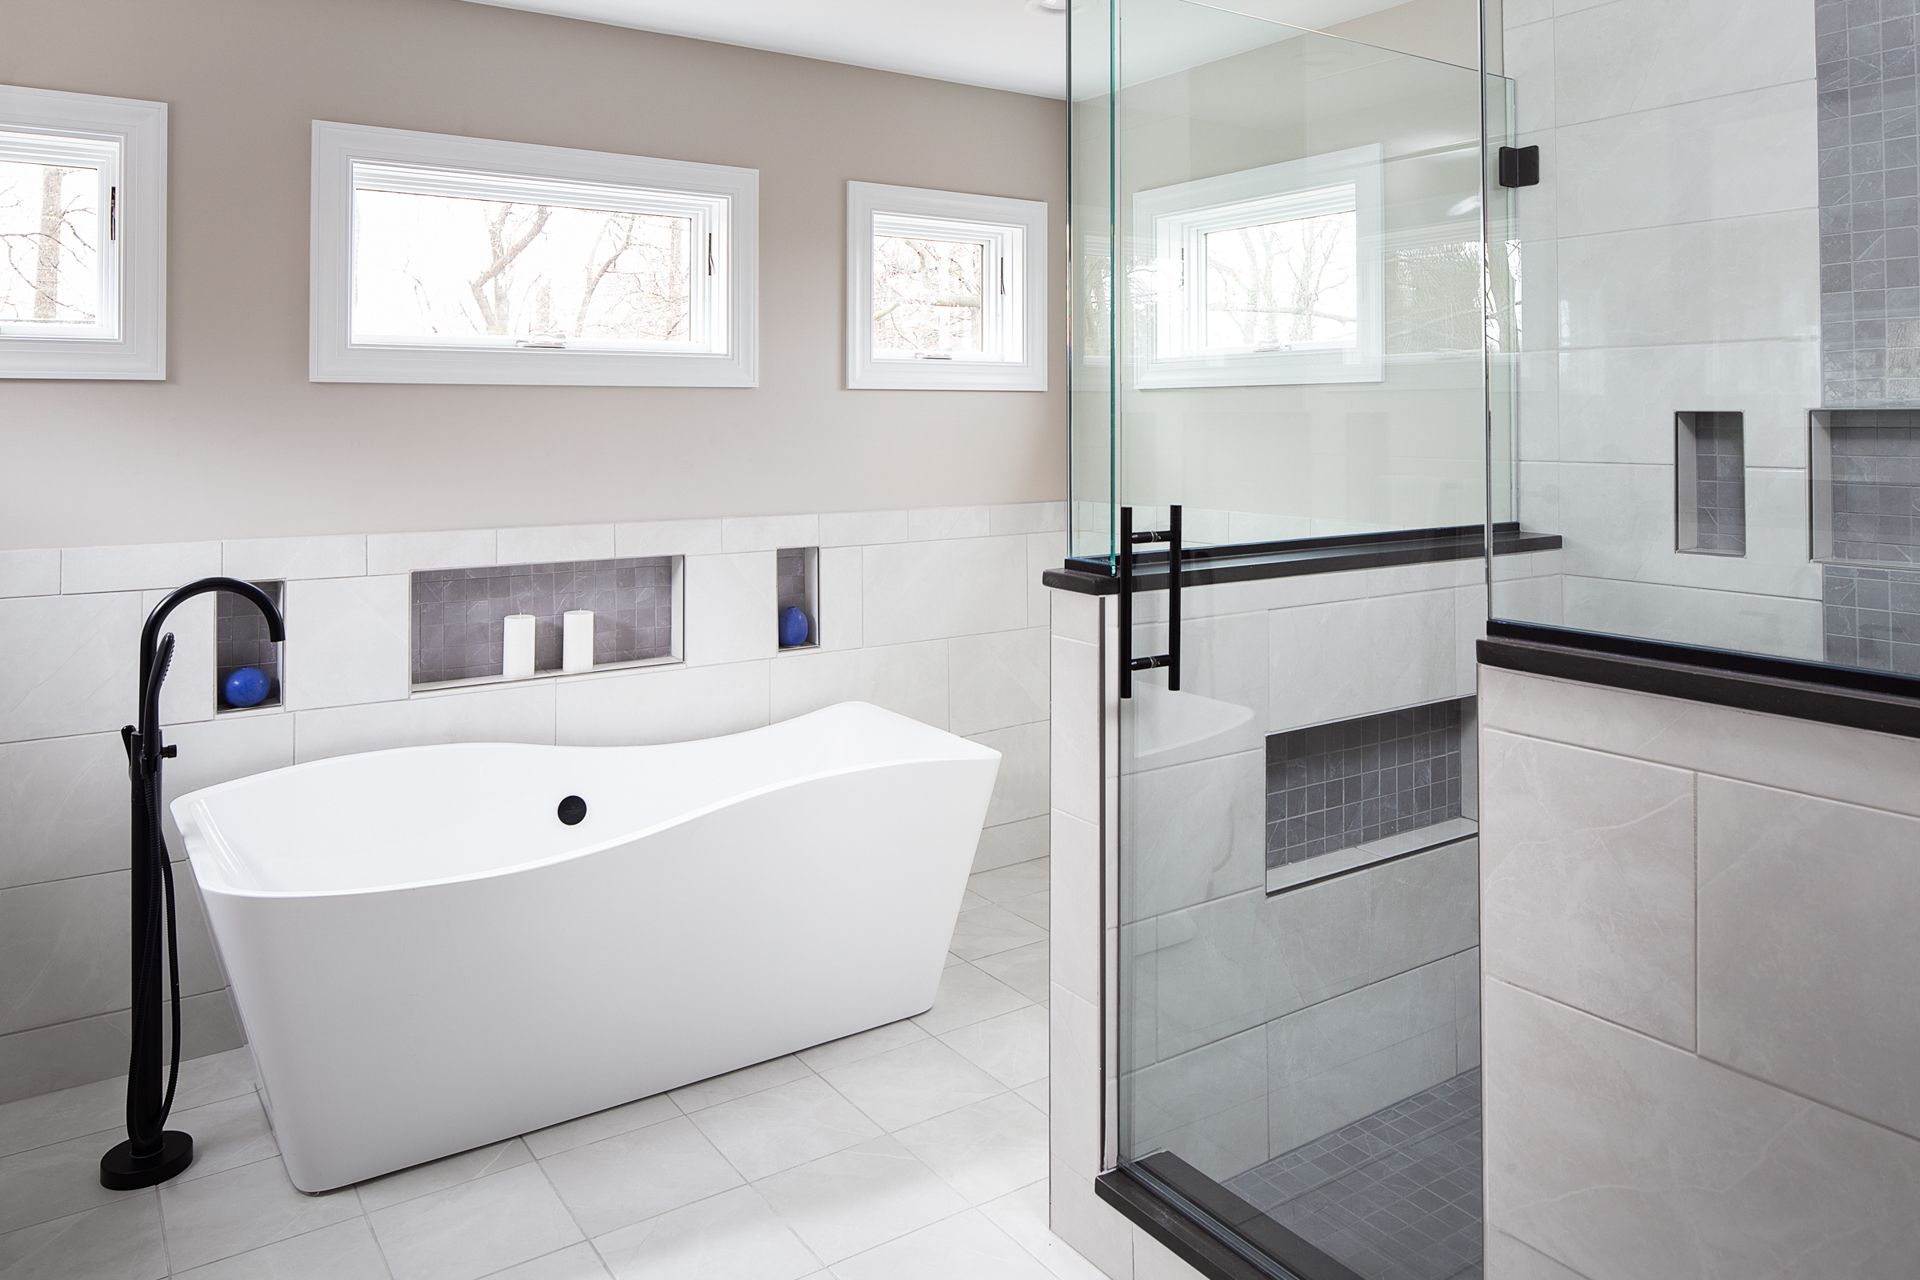 Modern, renovated bathroom with white tile, standalone tub, and separate glass-enclosed shower. 